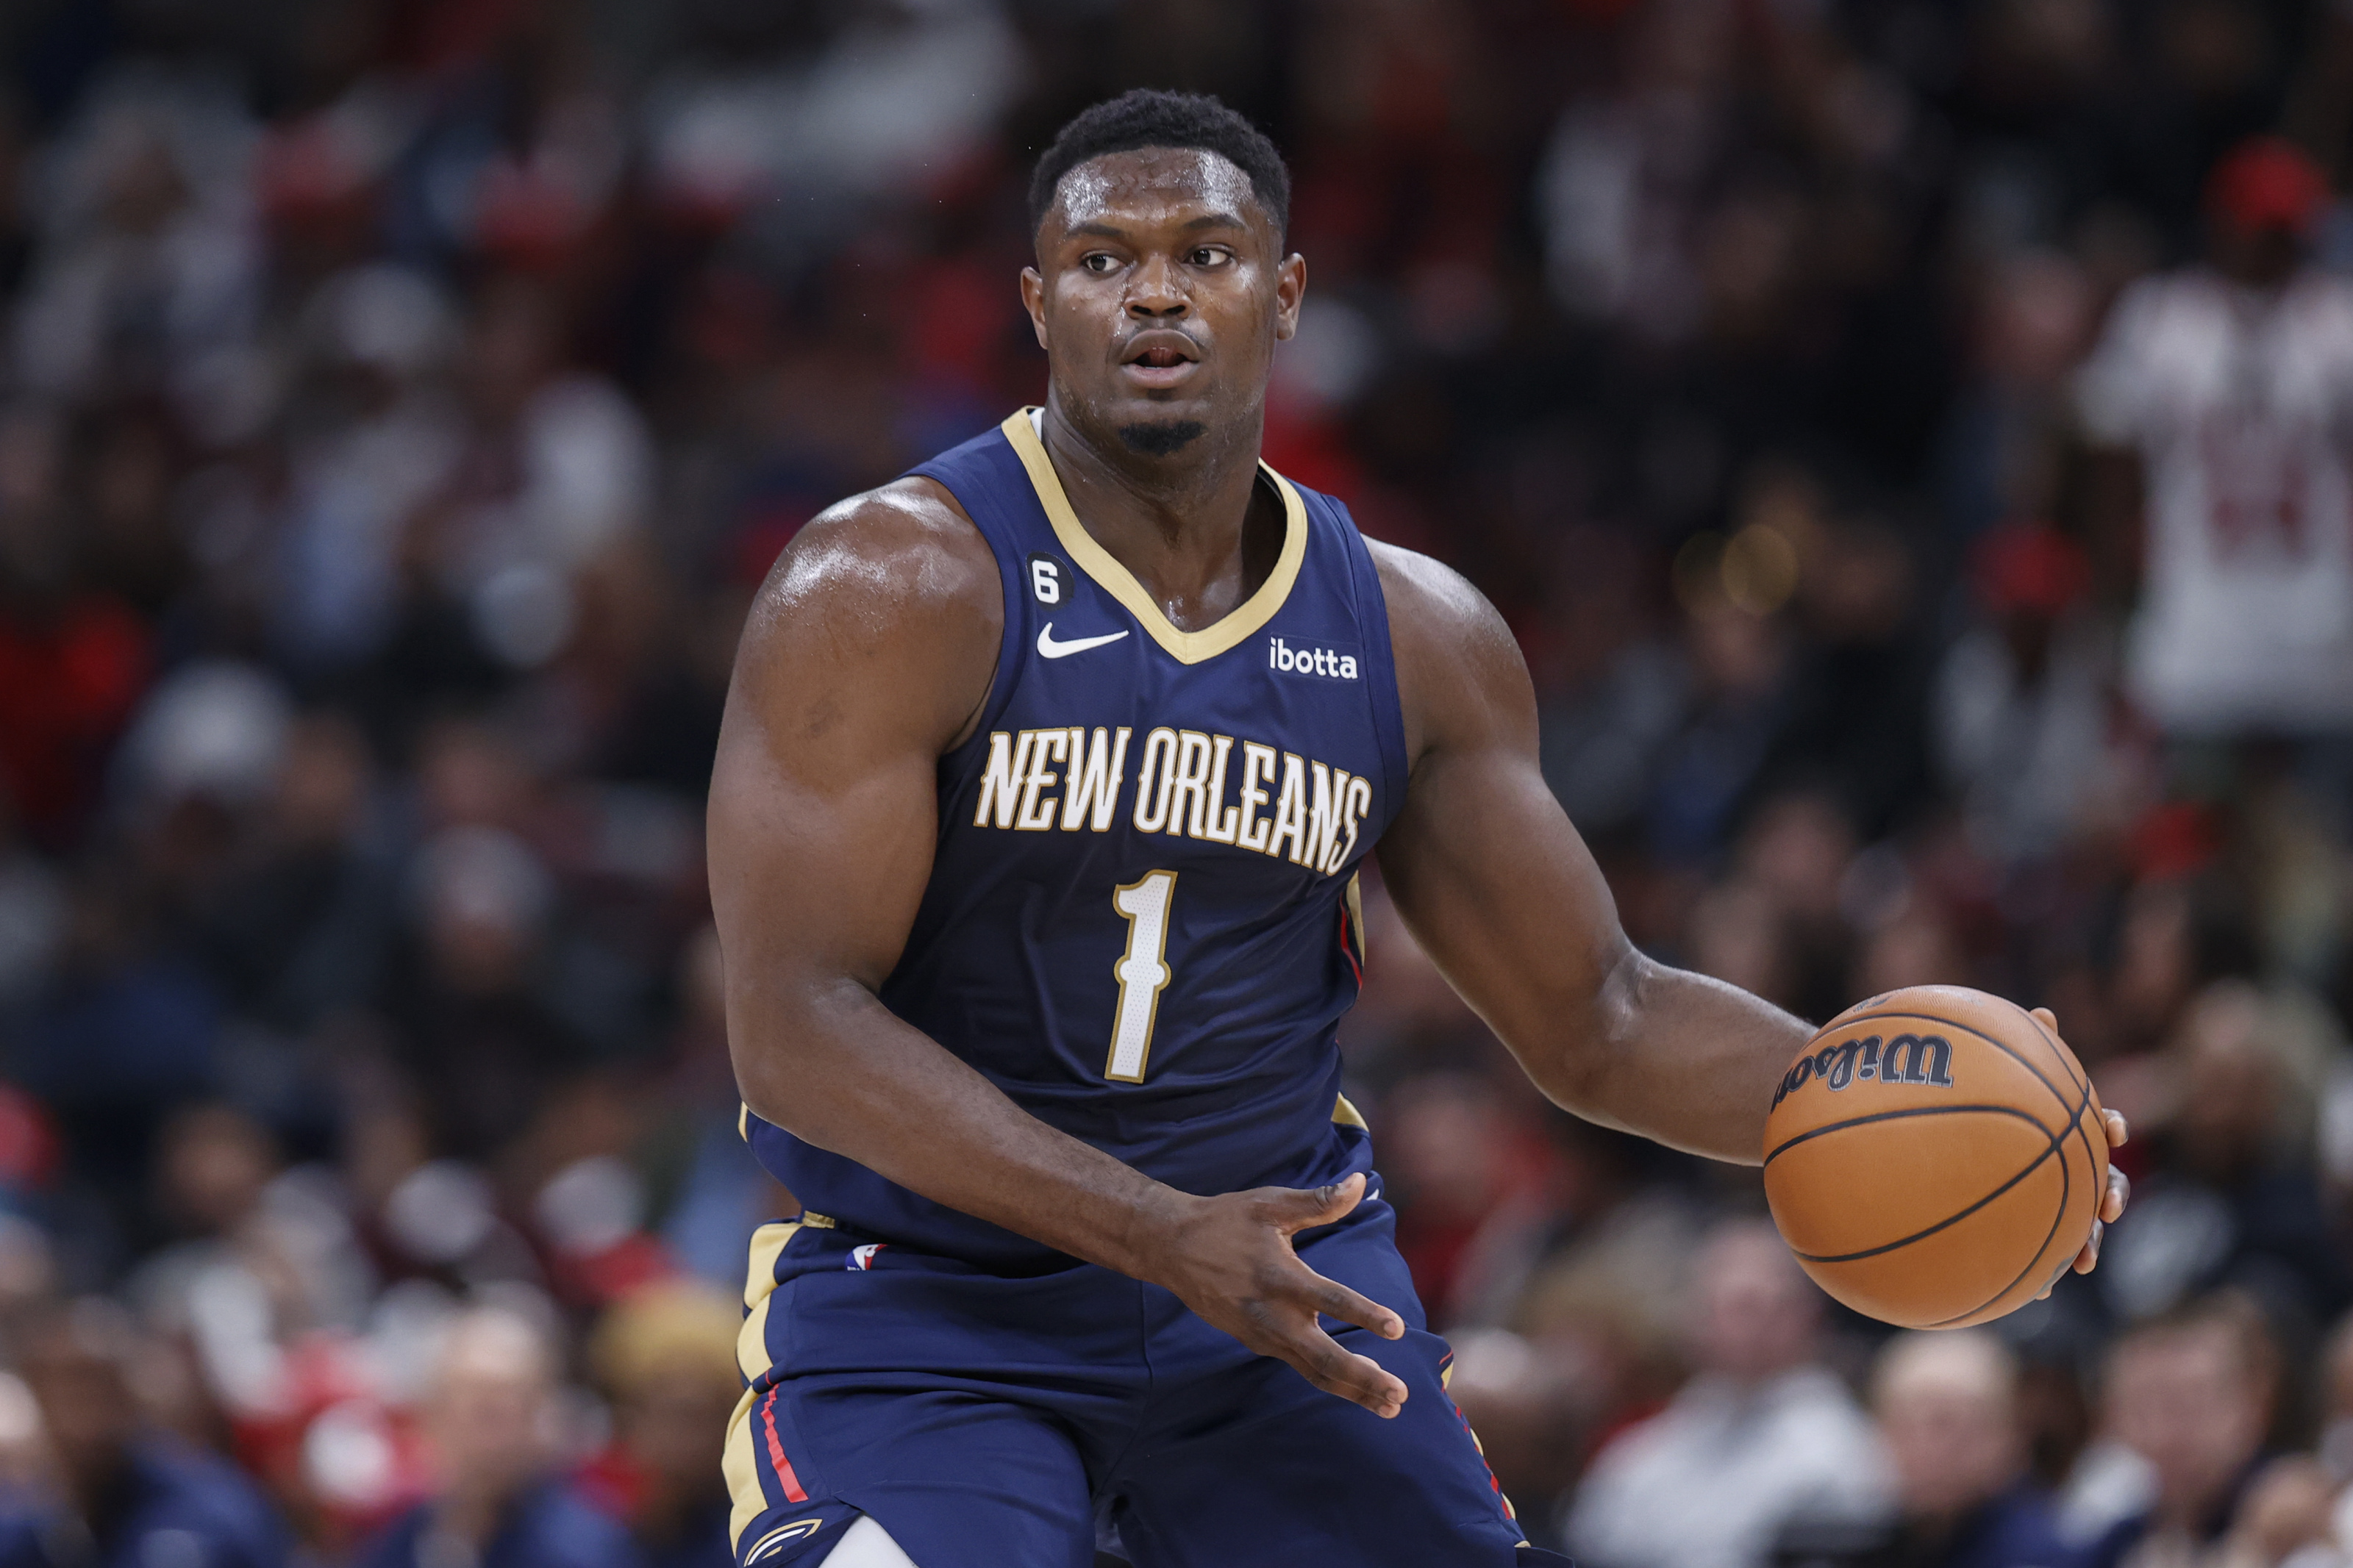 Zion Williamson's return to the court could come after the all